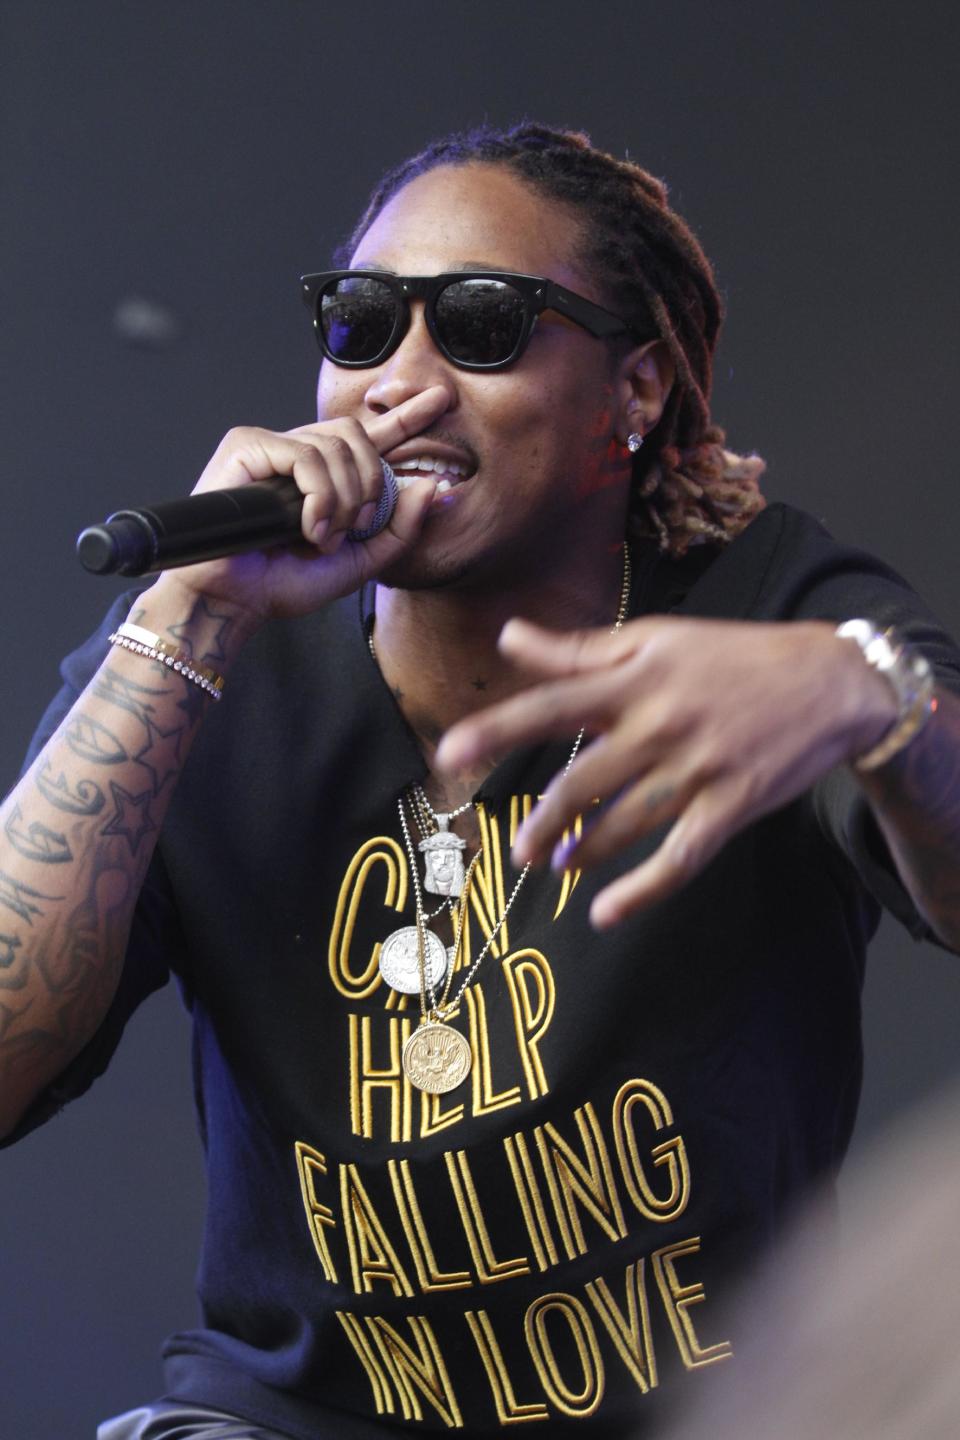 Future performs during the SXSW Music Festival Friday March 14, 2014, in Austin, Texas. (Photo by Jack Plunkett/Invision/AP)